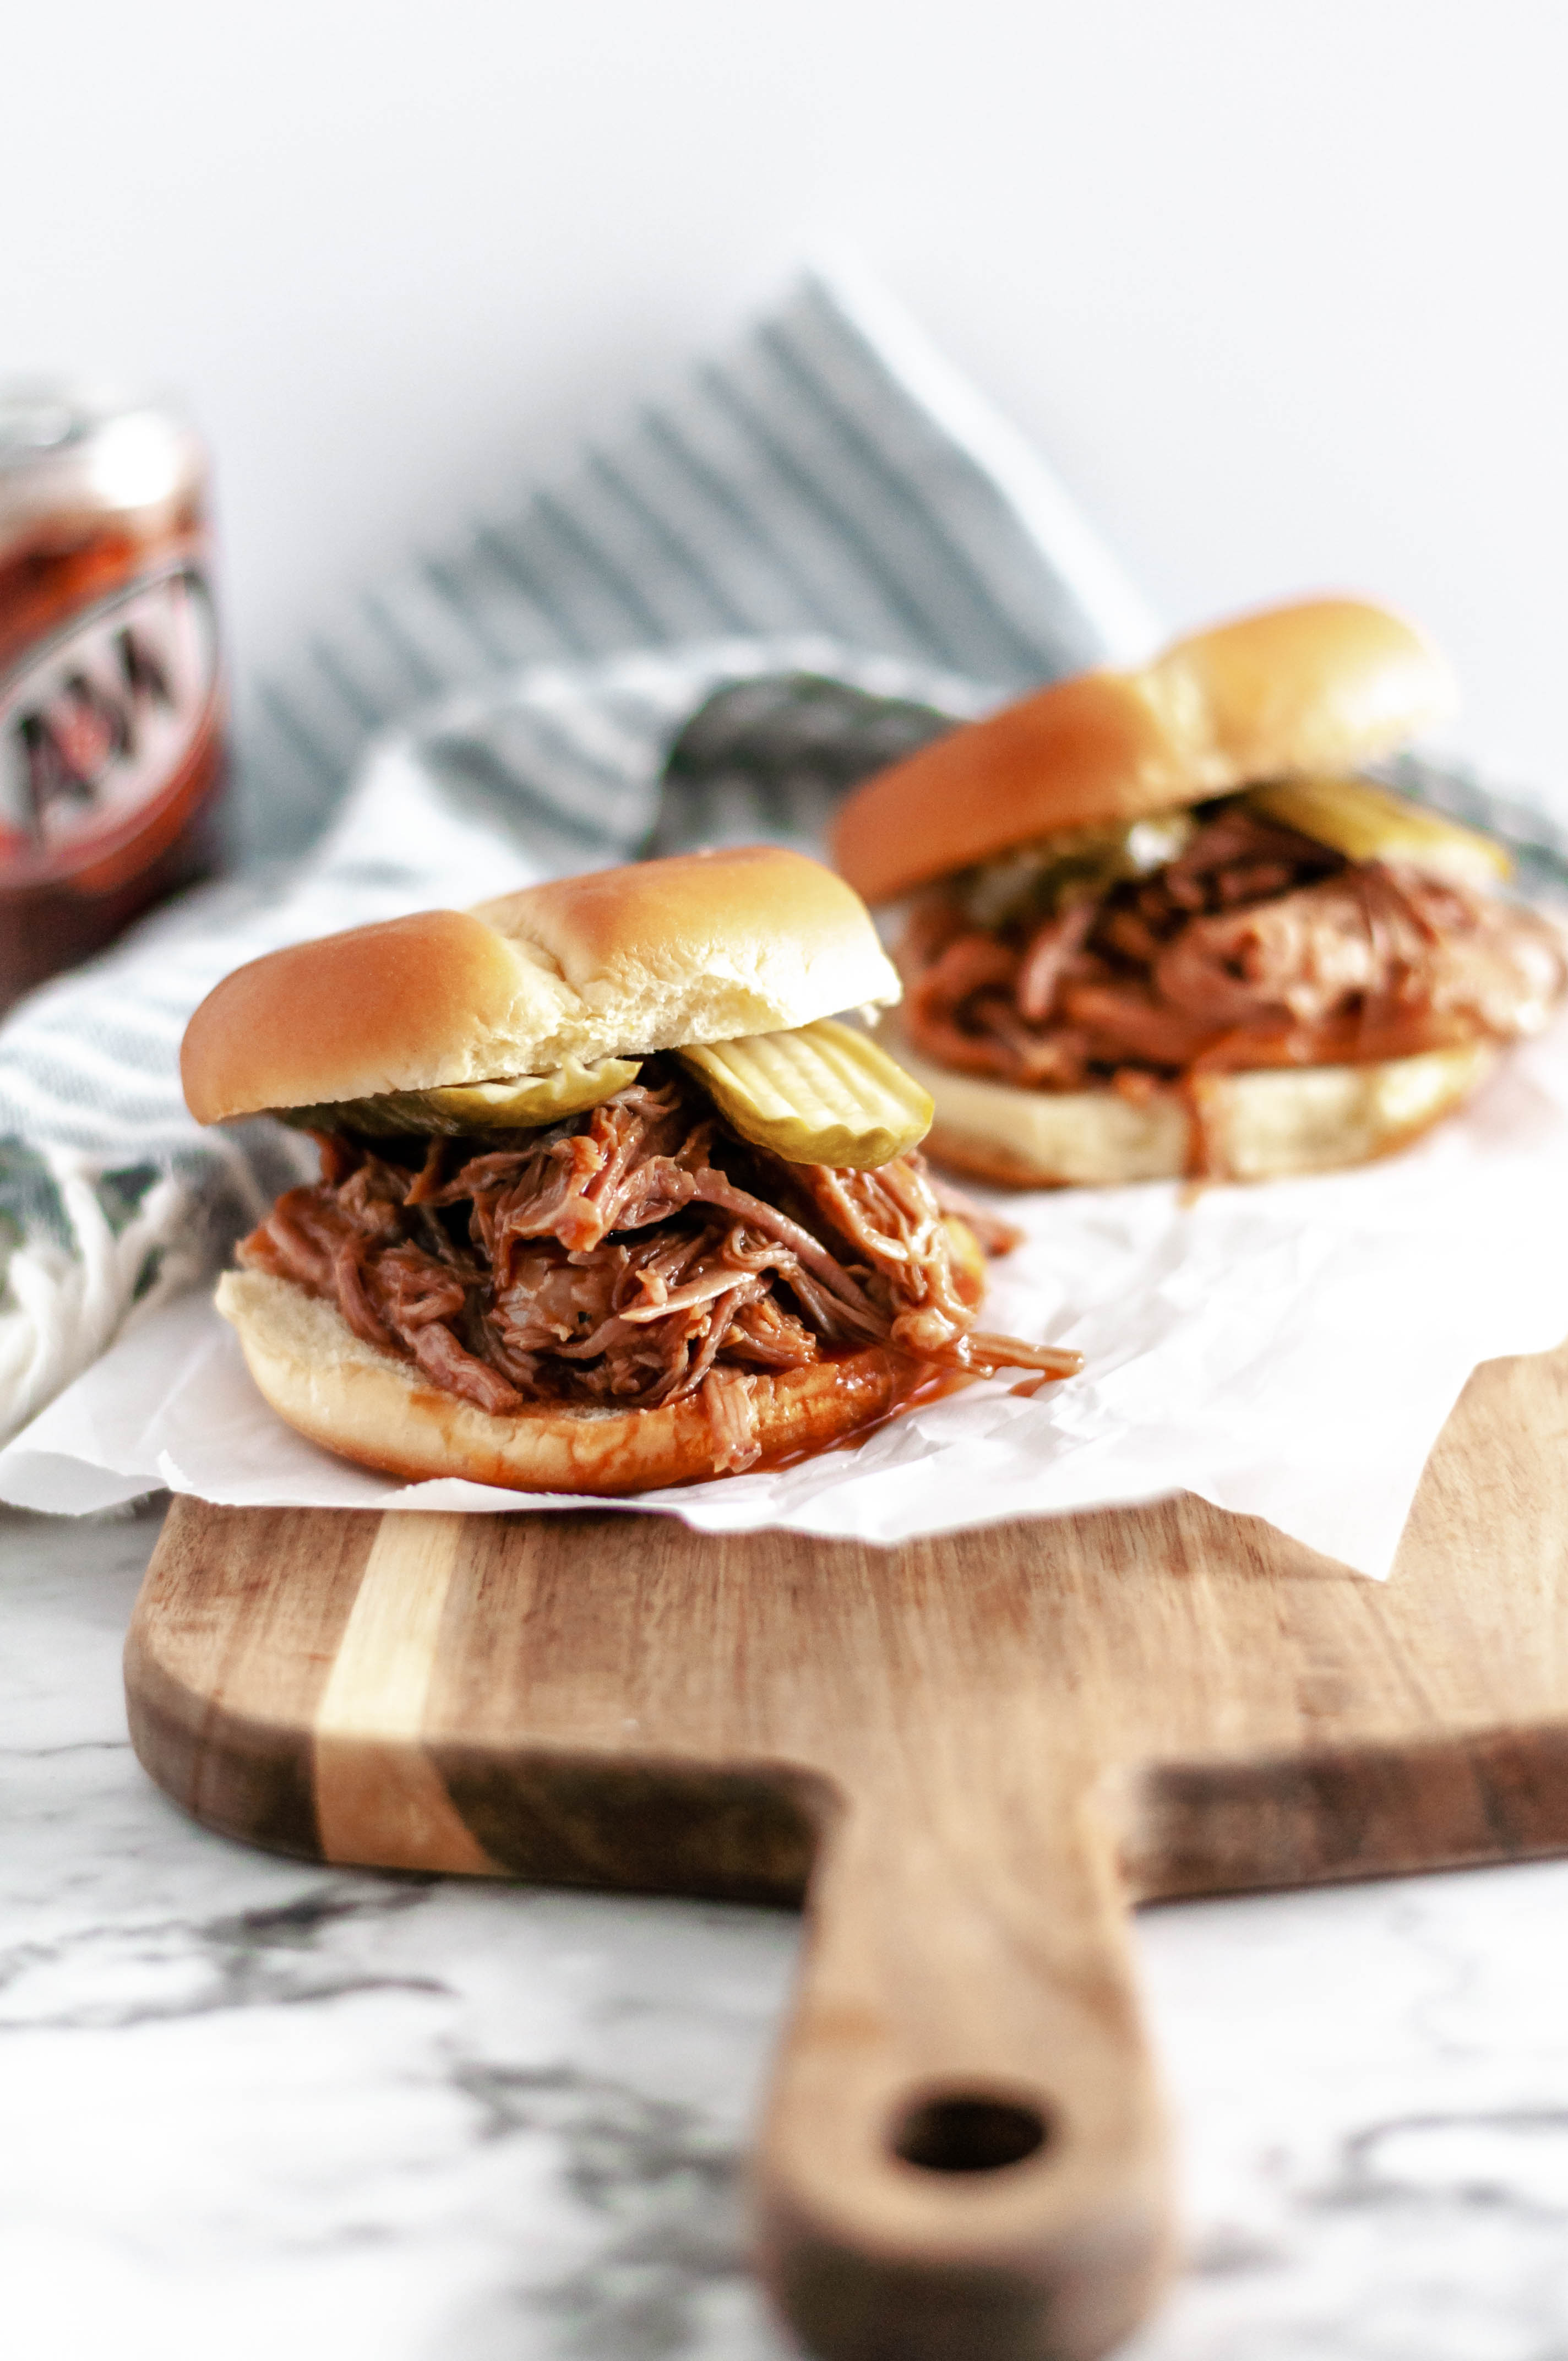 Rootbeer BBQ Pulled Pork Sandwiches are super simple to make in the slow cooker. Four ingredients & hours in the slow cooker to tender, saucy perfection.